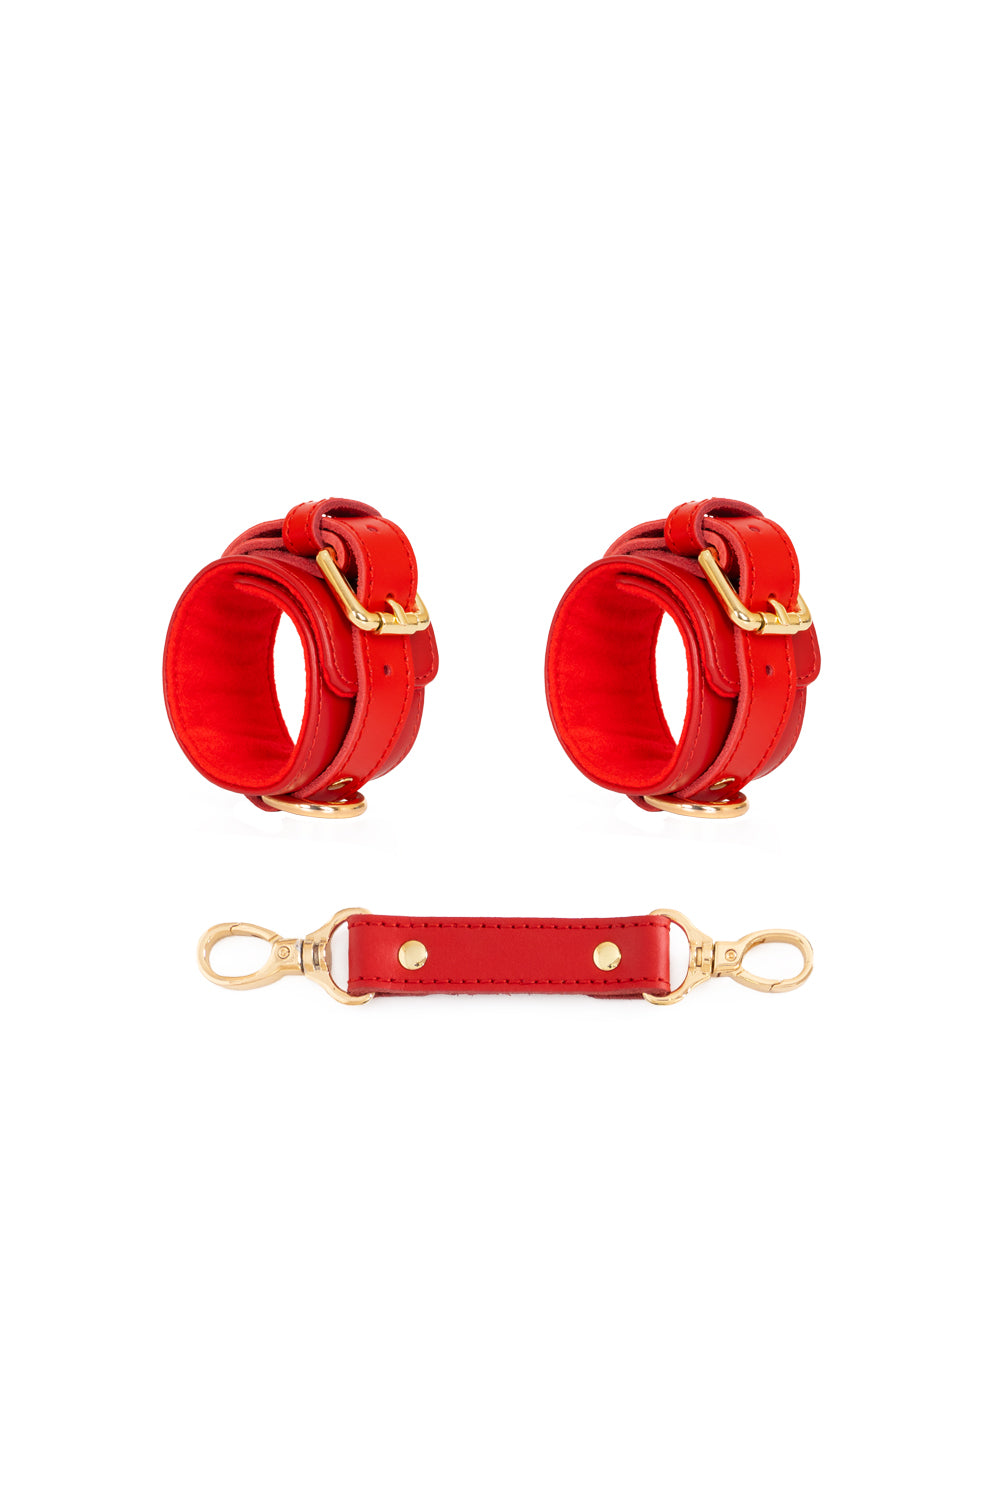 Cuffs for wrists, for ankles. Restraint Bondage with standard leather connector